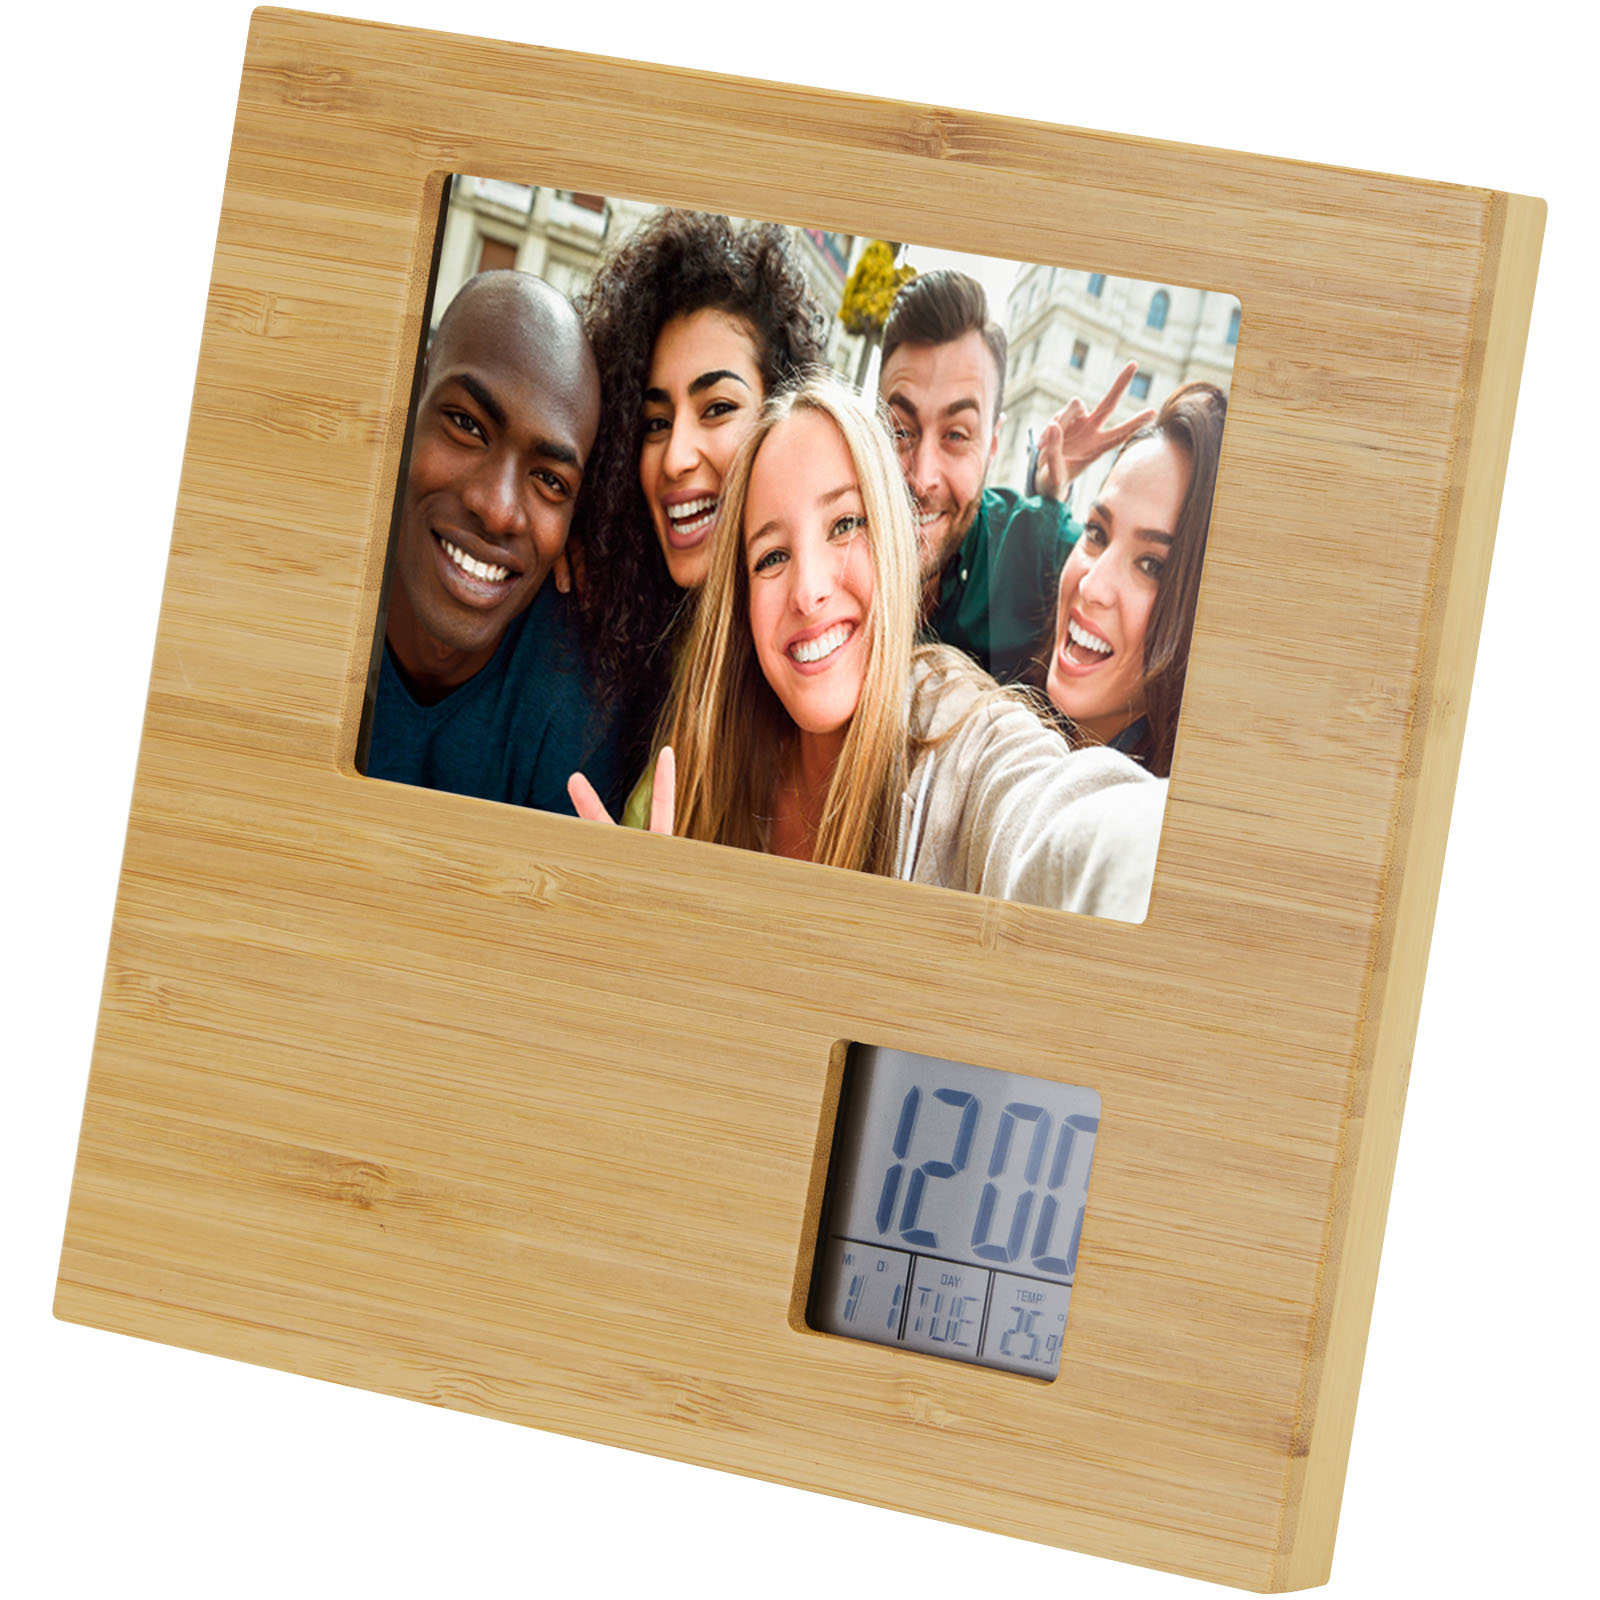 Home Accessories - Sasa bamboo photo frame with thermometer